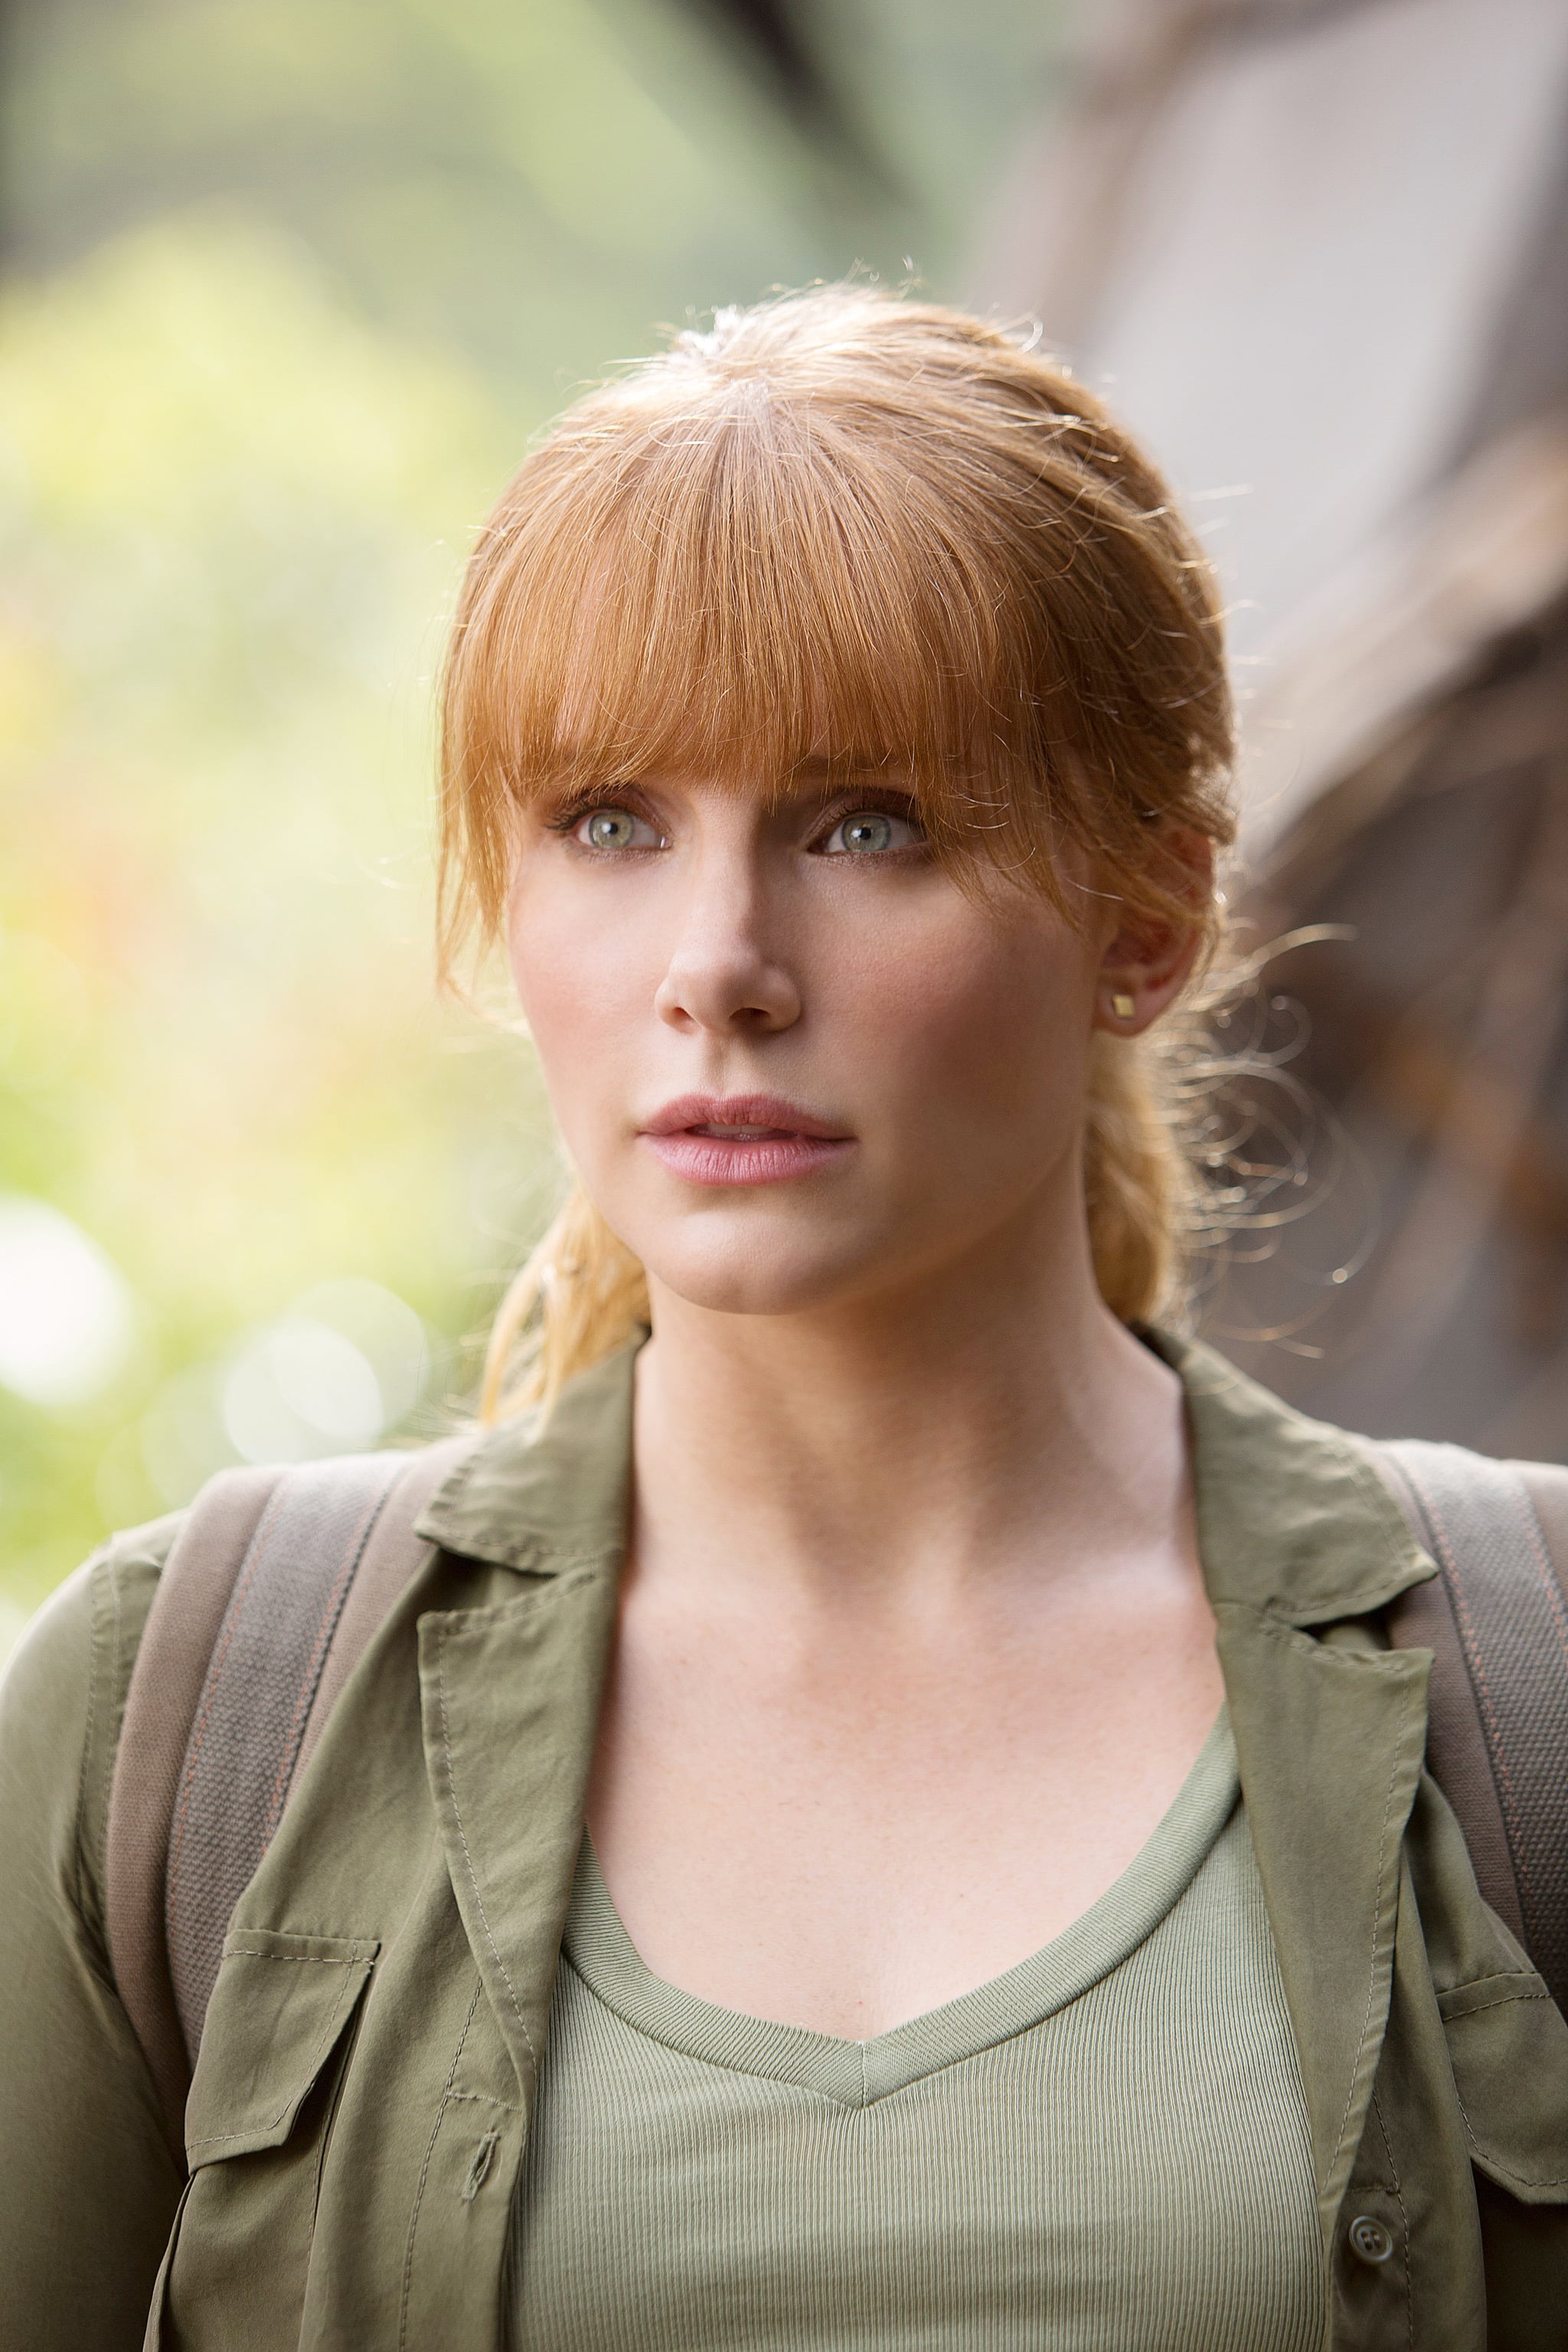 Claire Jurassic World | vlr.eng.br